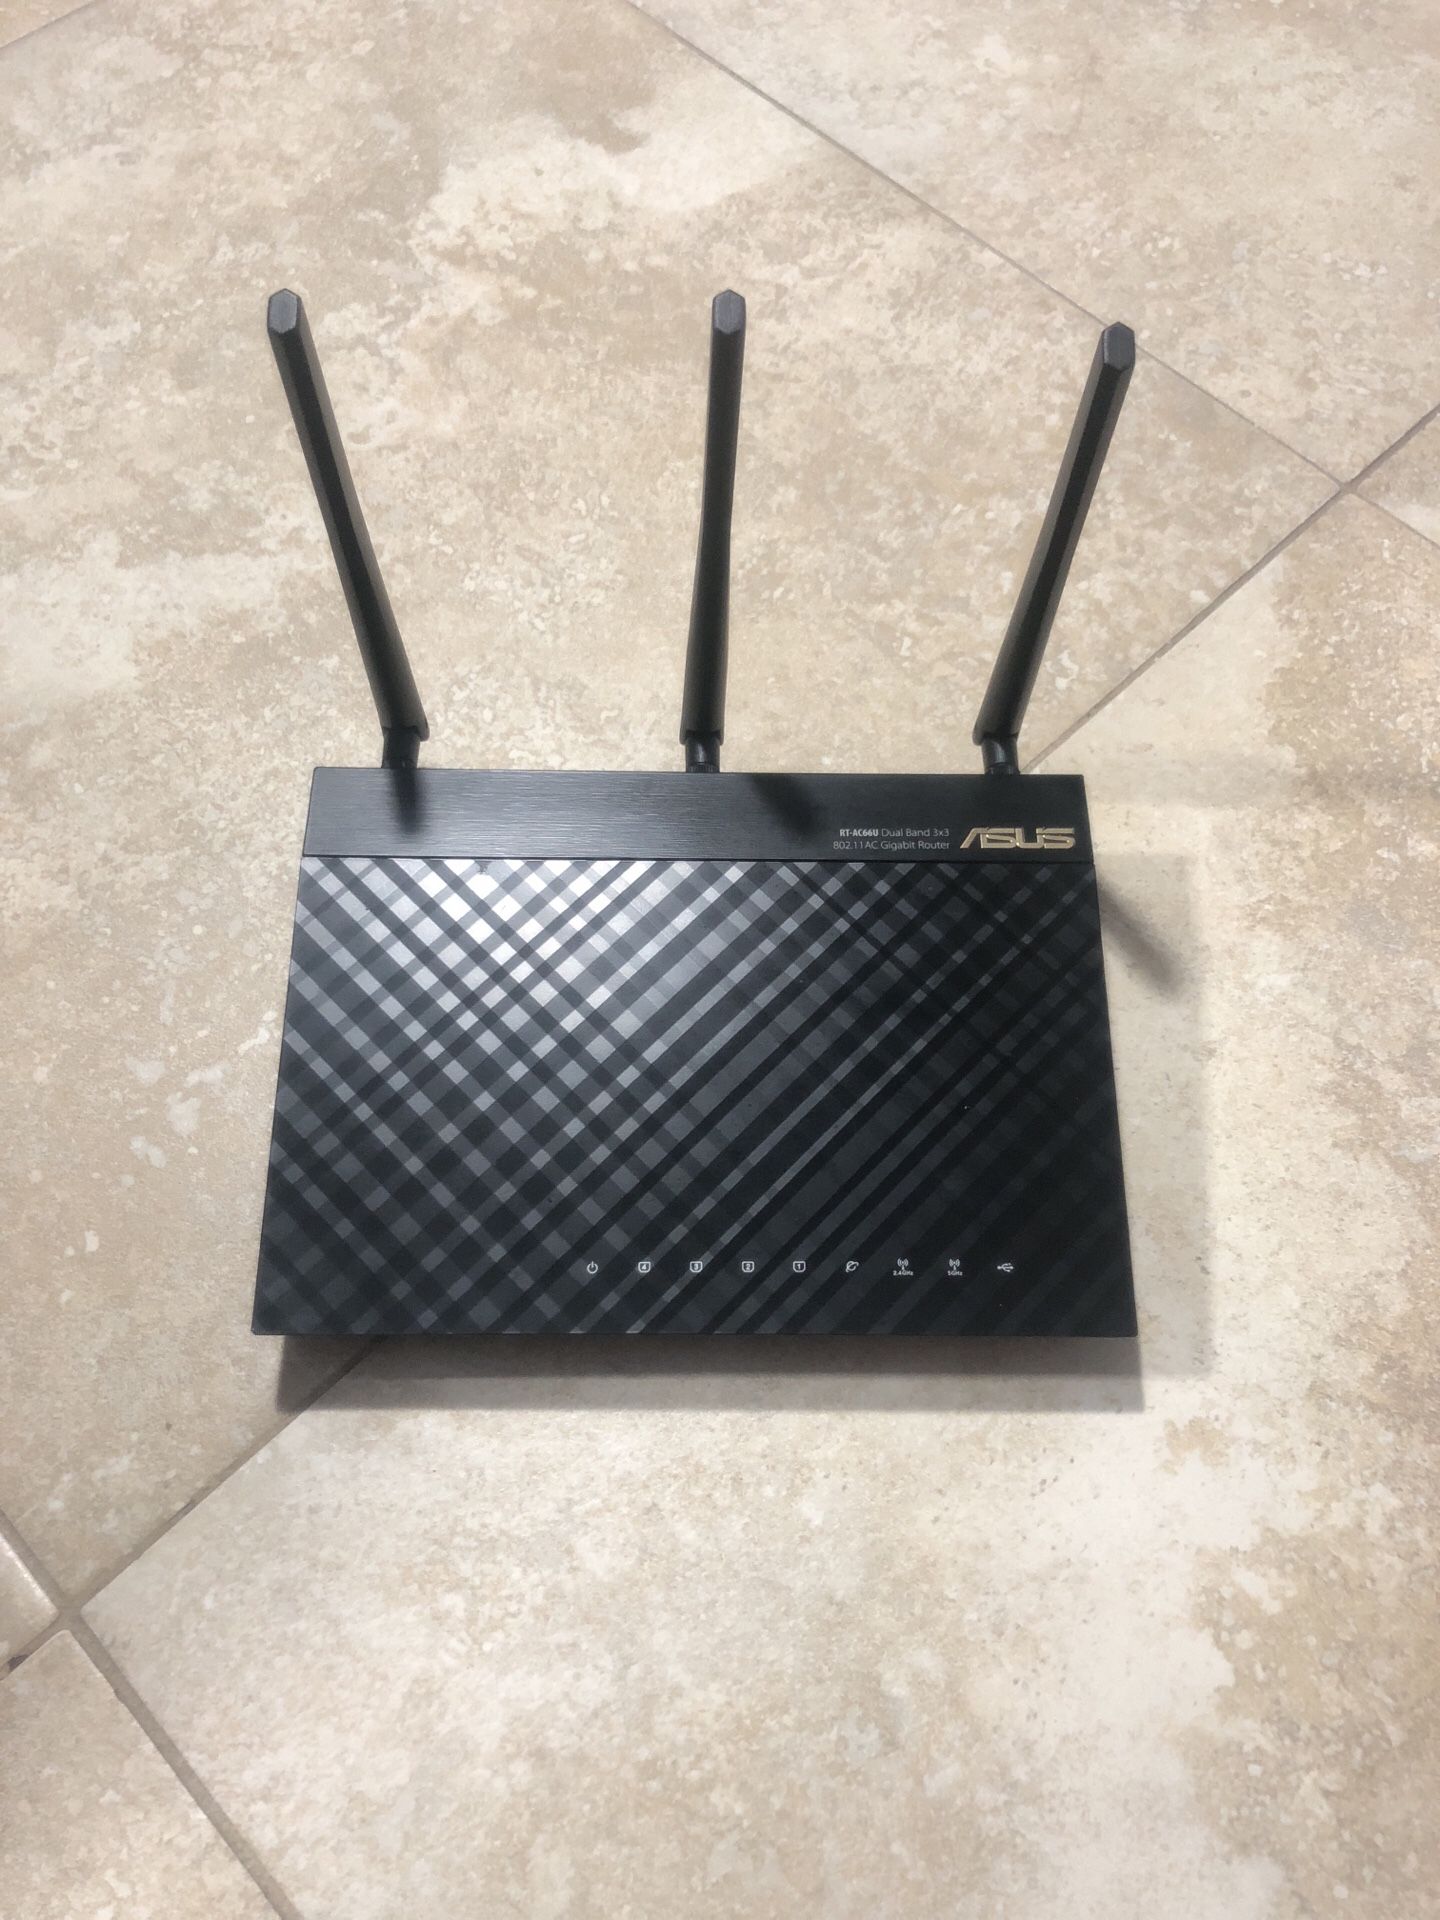 Asus Dual Band Router RT-AC66U